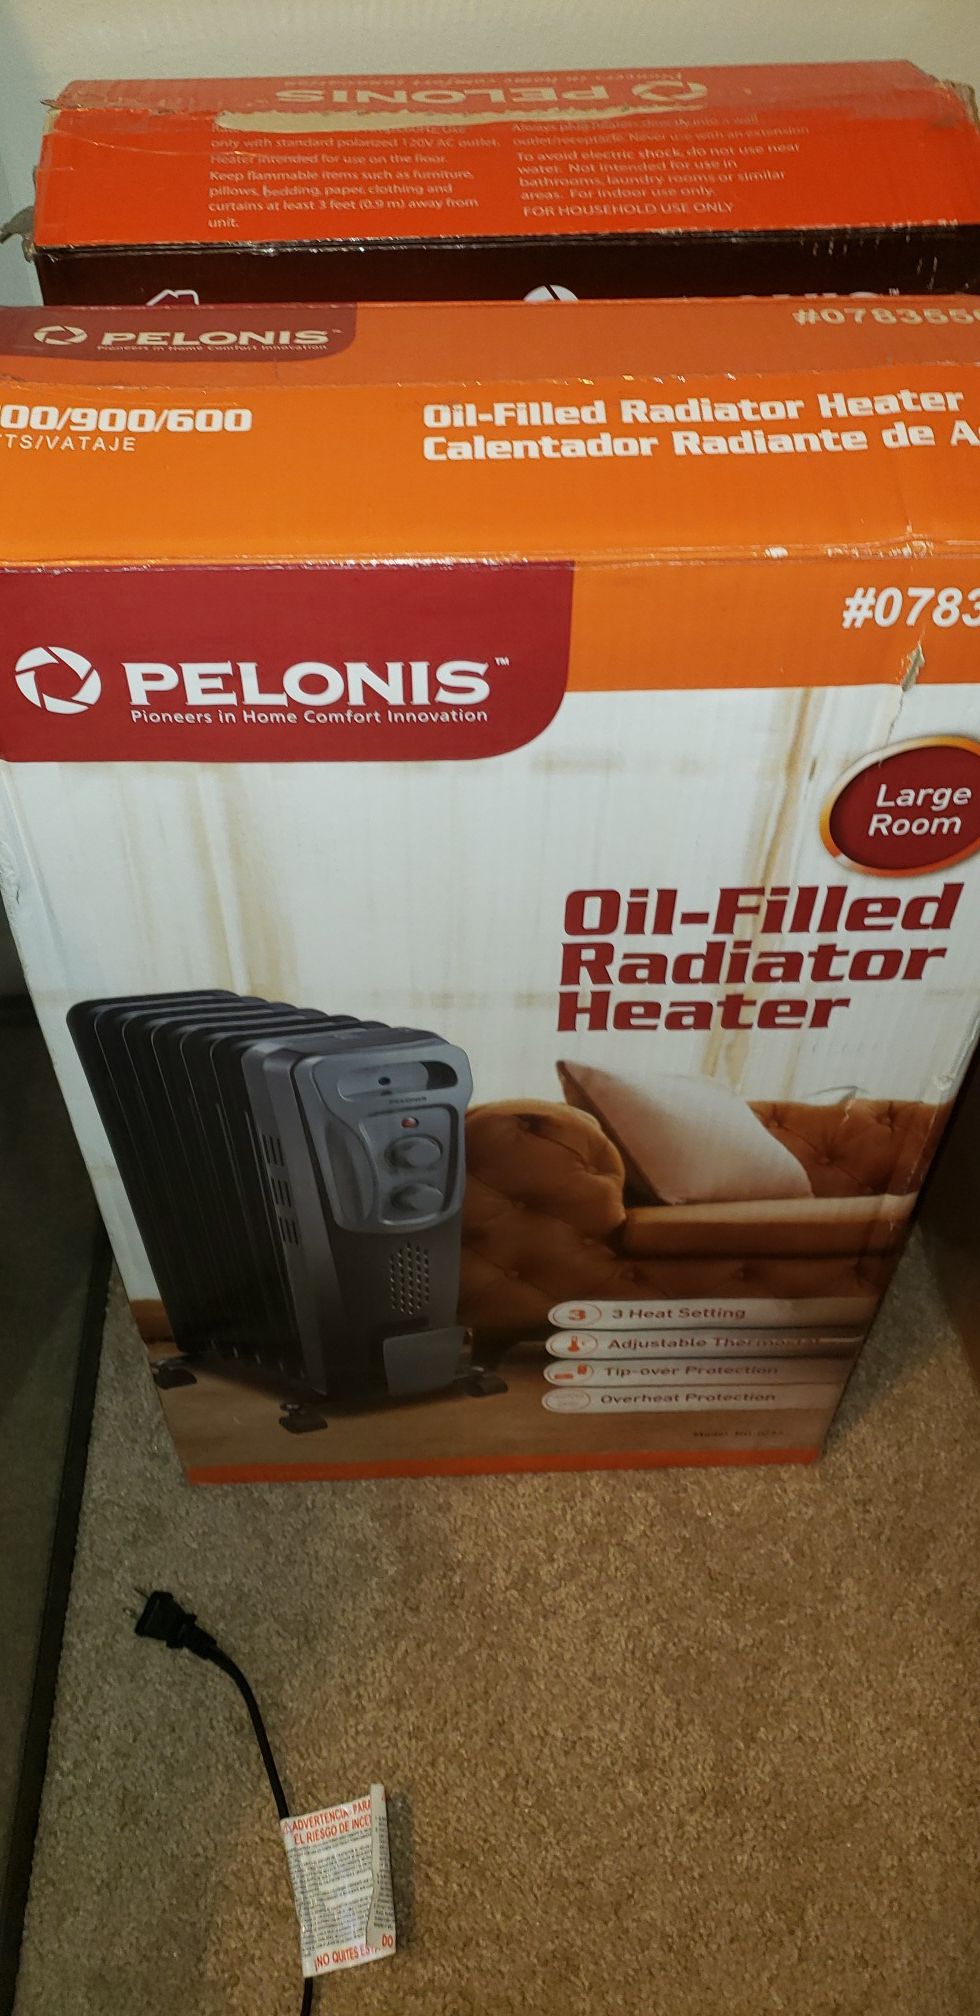 Two Pelonis space heater (GET IT NOW BEFORE THE PRICE GOES UP THIS WINTER!!!!)